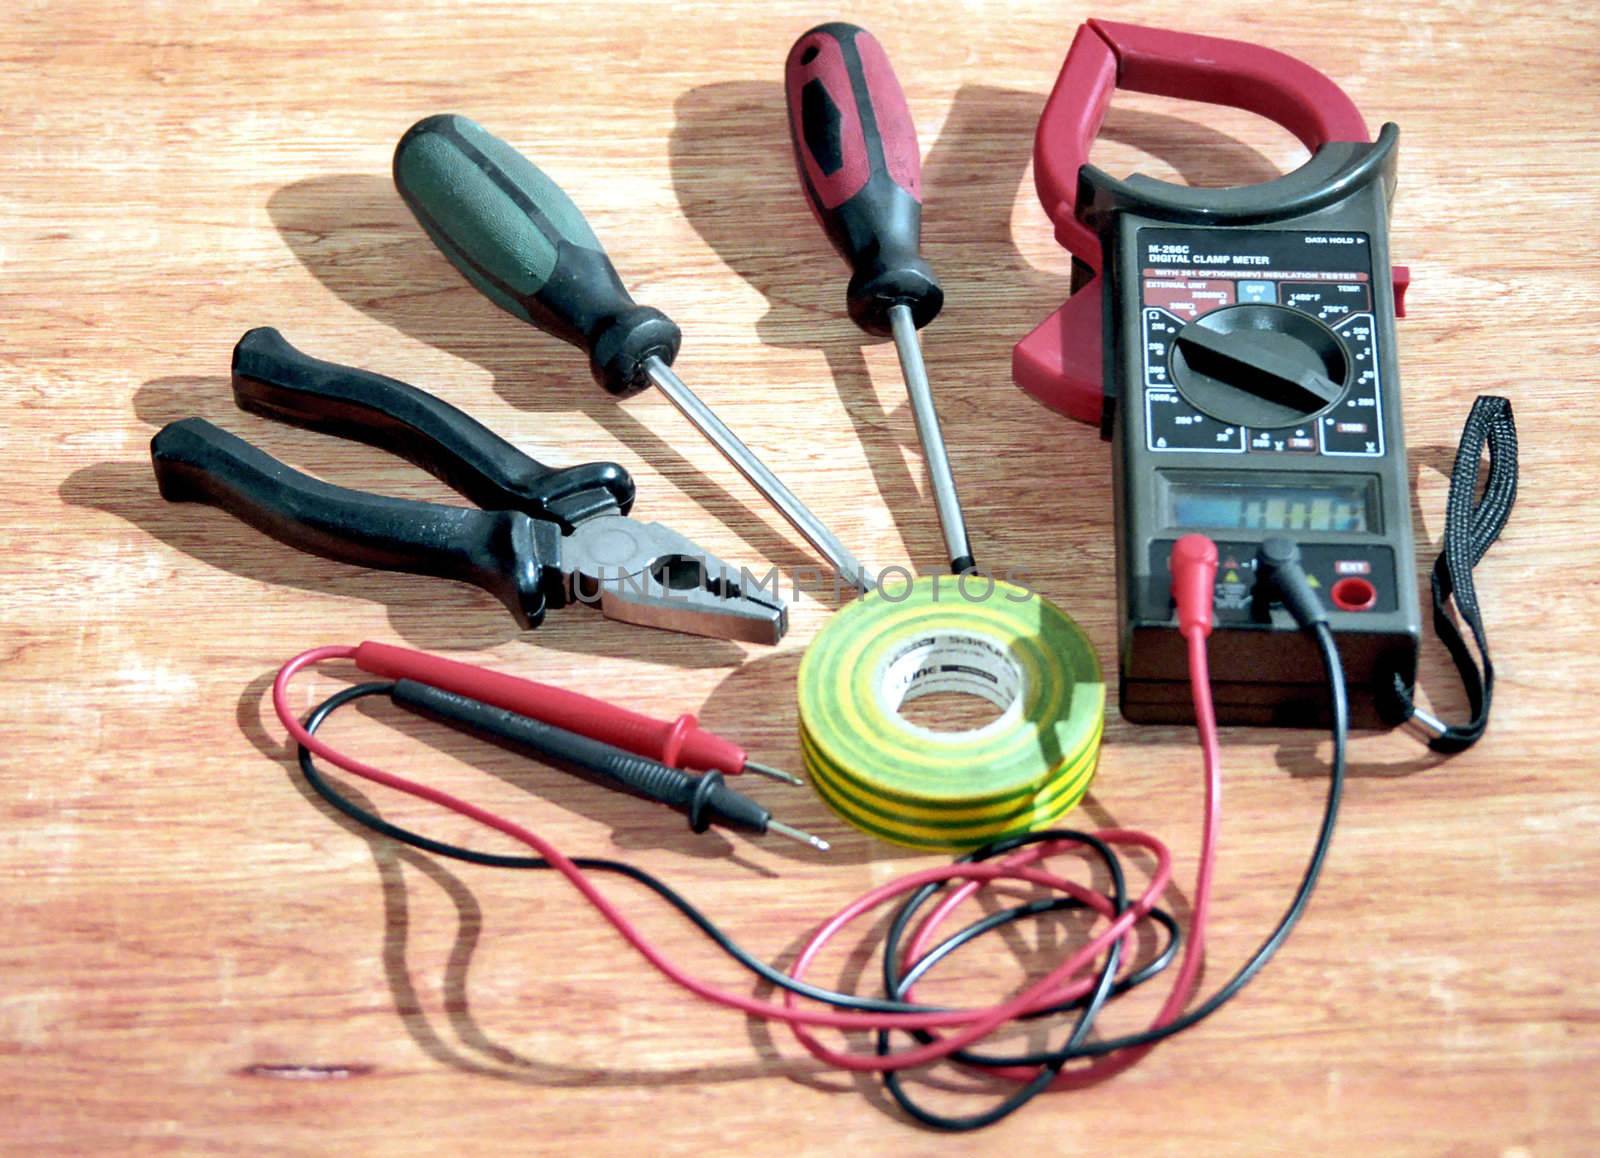 Electrician tools by mulden